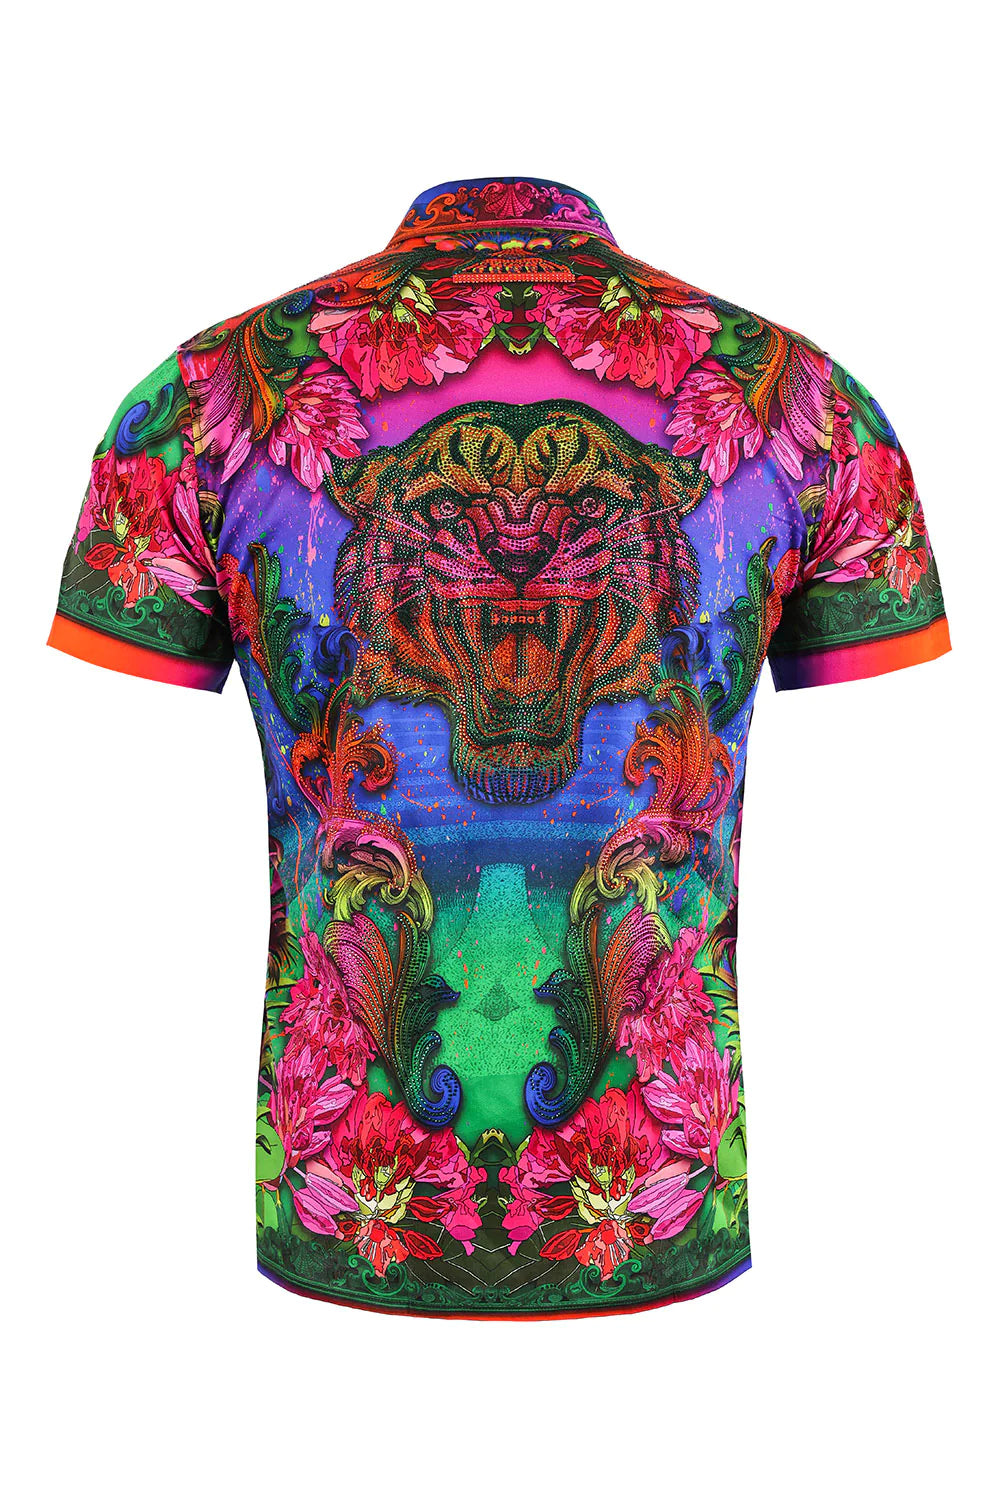 Barabas Tiger and Multi-Color Rhinestone Floral Short-Sleeve Button-Down Shirt